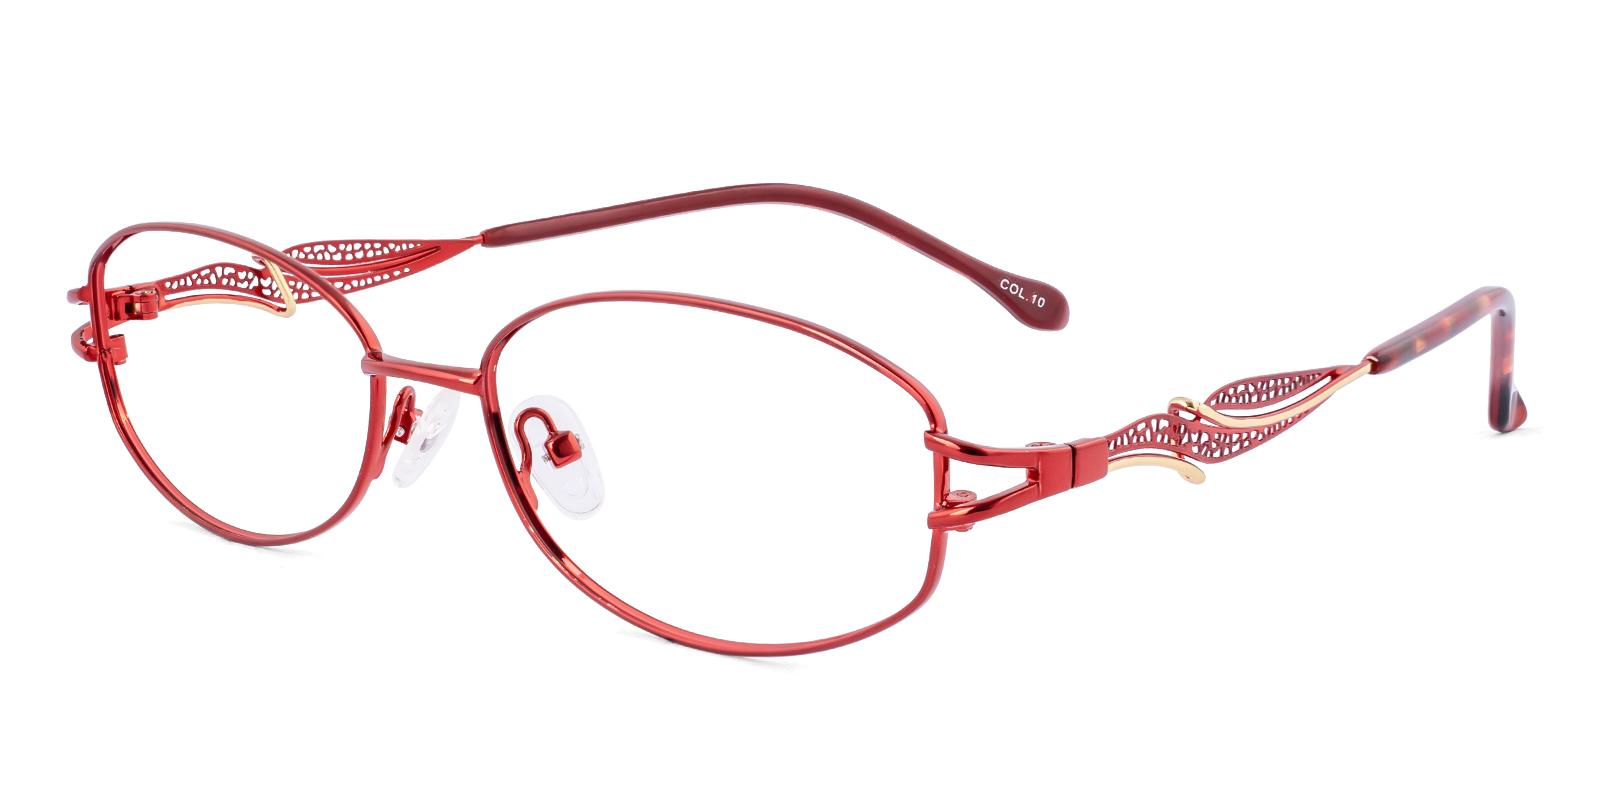 Glplious Red Metal Eyeglasses , NosePads Frames from ABBE Glasses